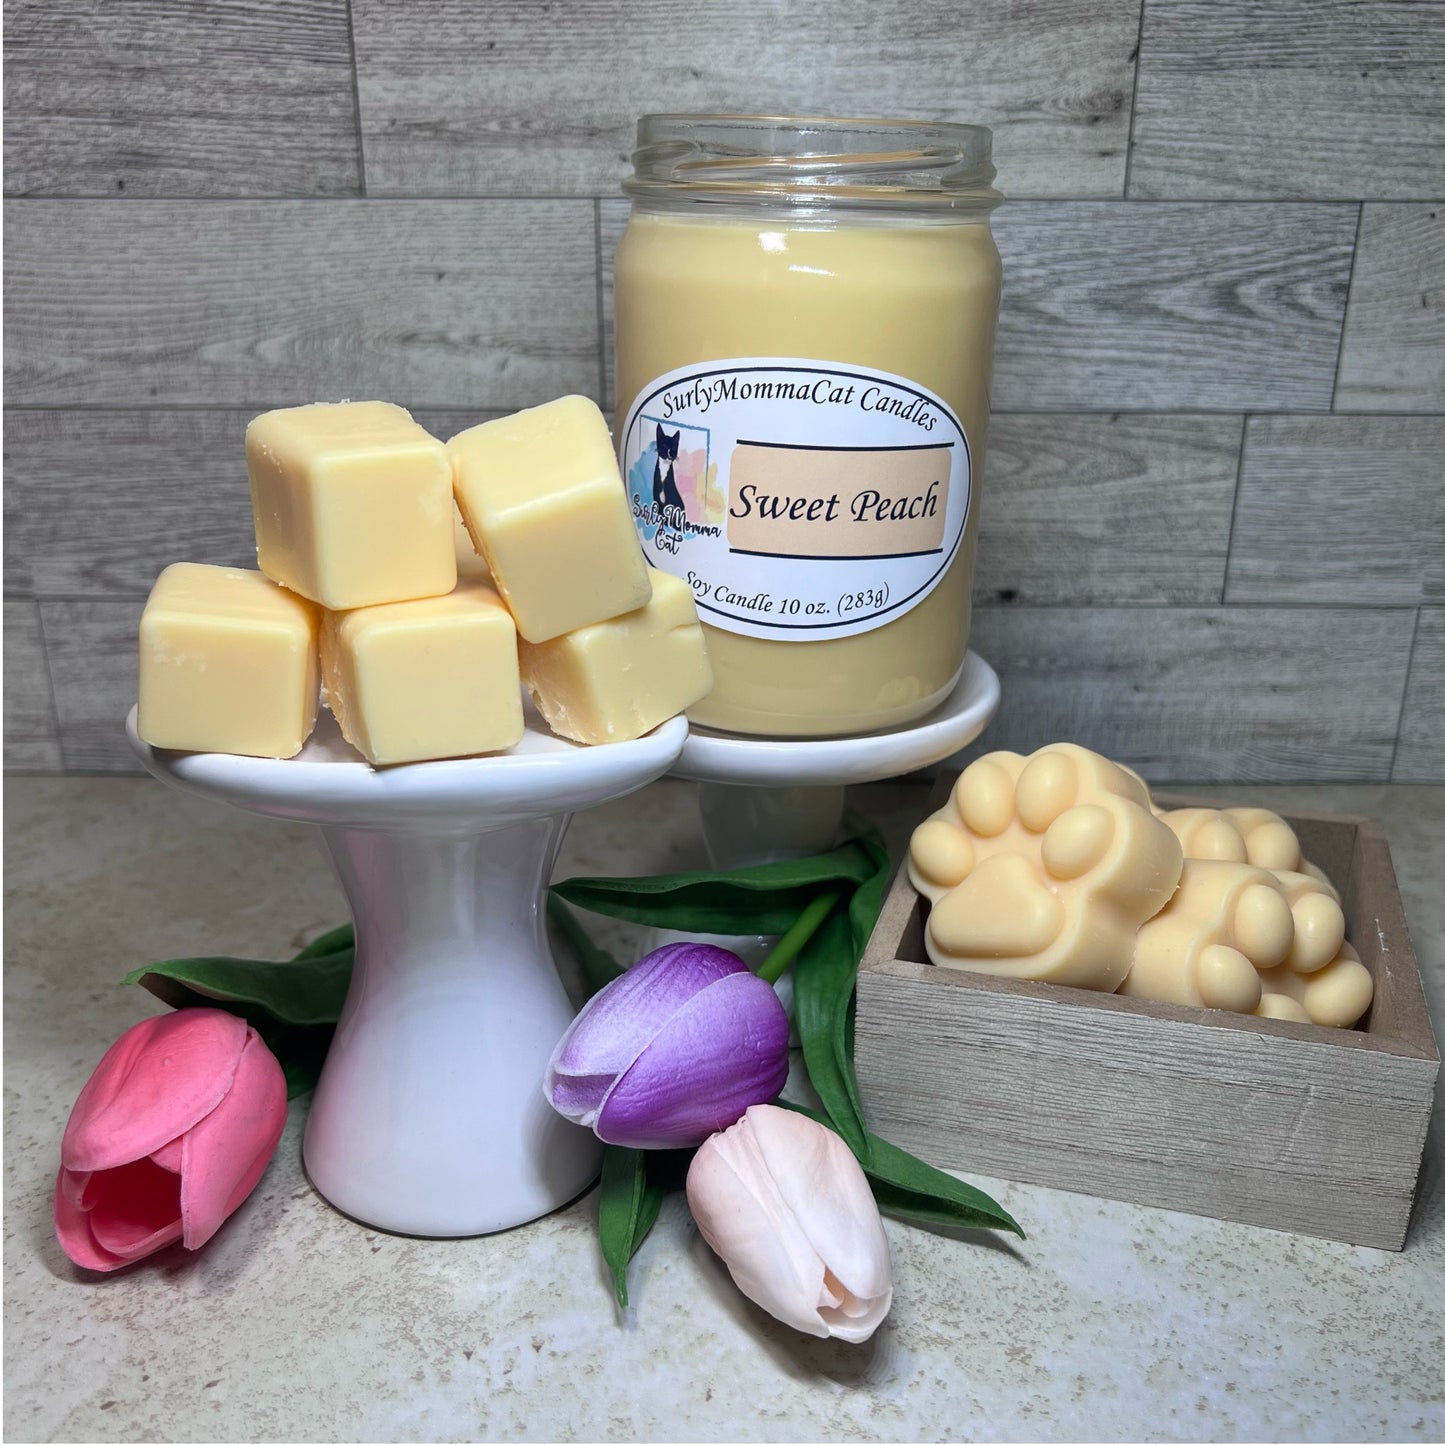 Tan Sweet Peach soy glass jar candle with cubed and pawprint wax melts on small white pedestal with the paw prints in a rustic box, with some pink, purple, tan flowers for decoration.